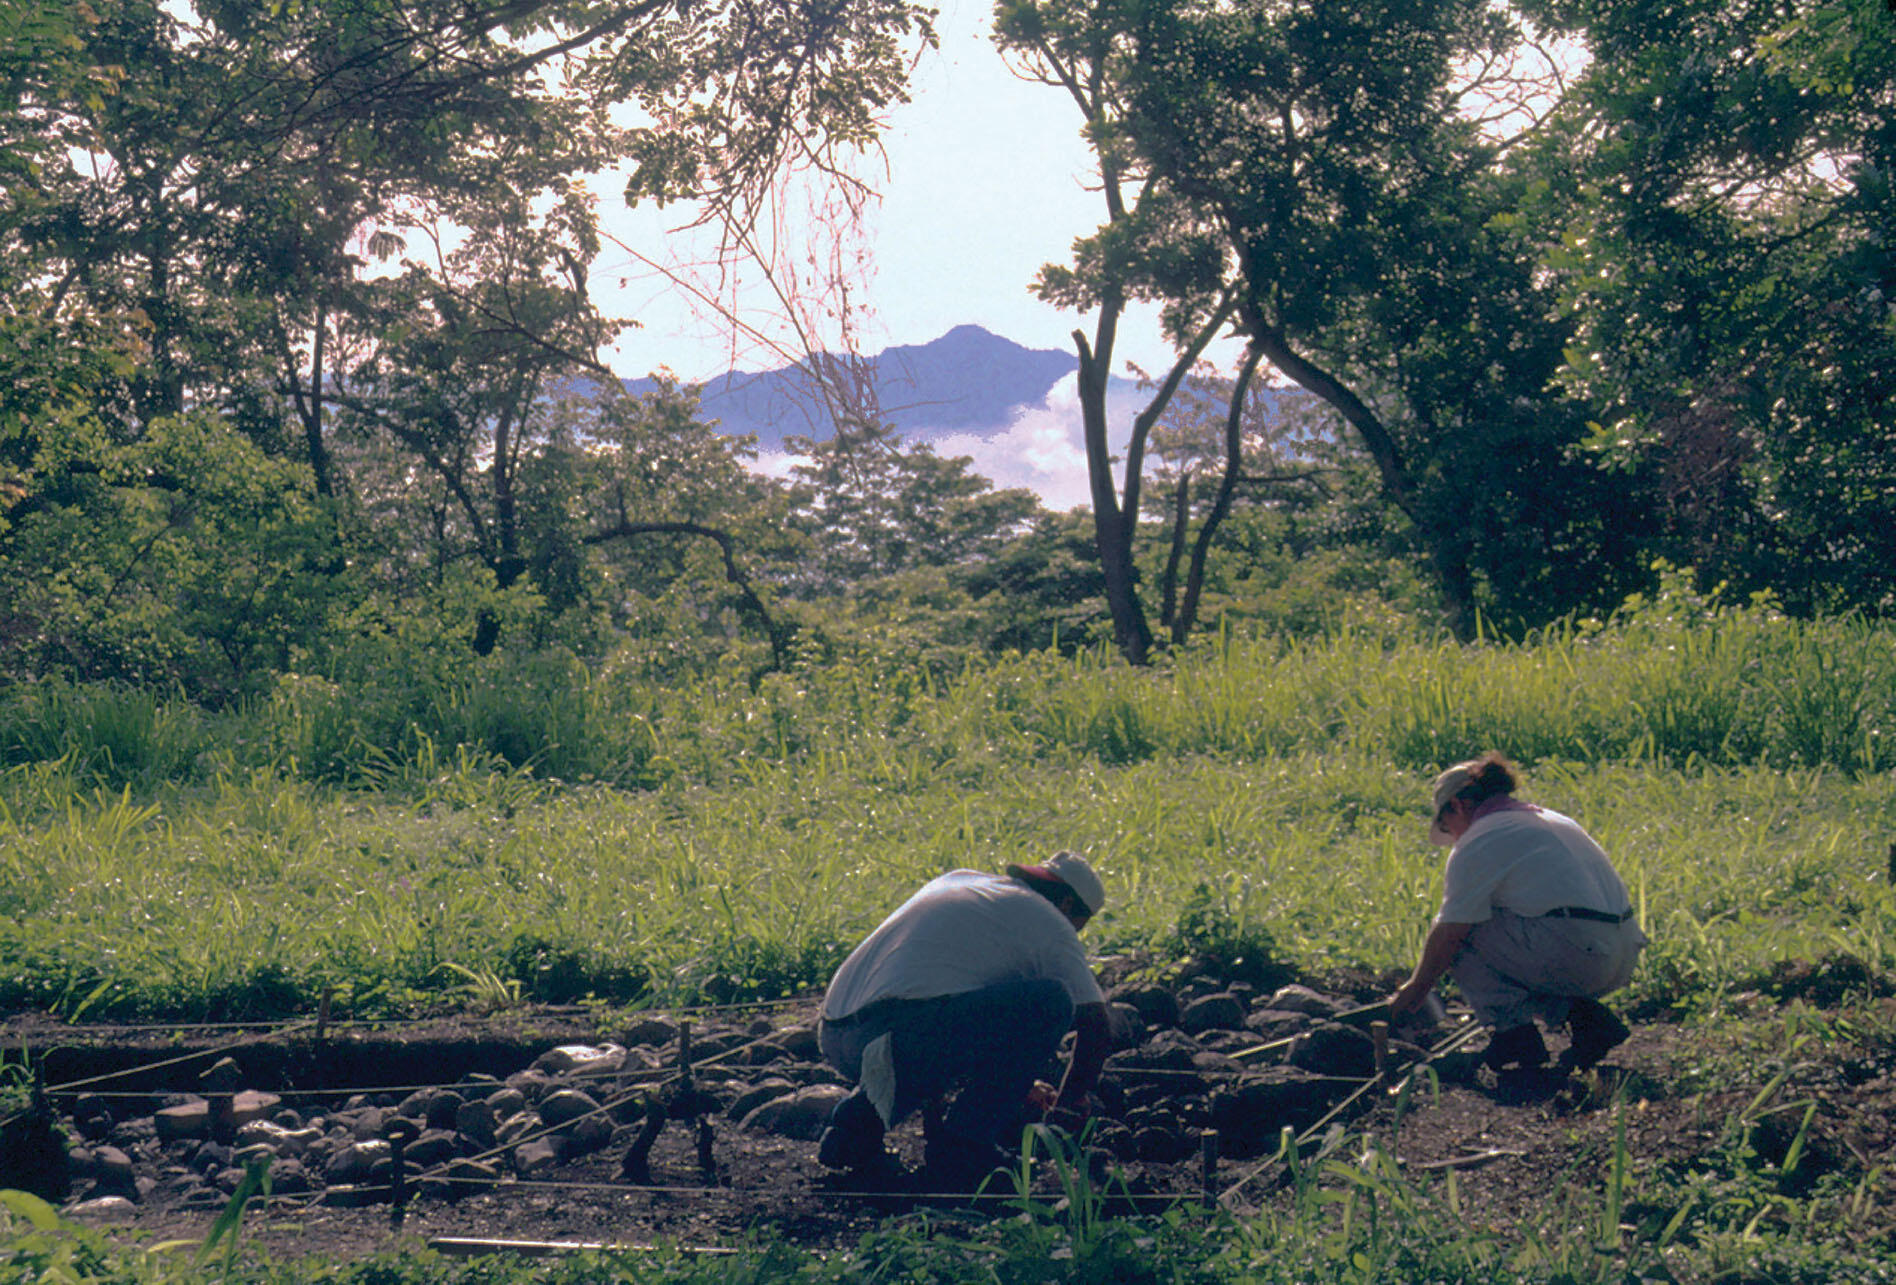 Julia Hendon leads excavations in the fields at Cerro Palenque, Honduras, in 2002. (Photo by Jeanine Lopiparo.)